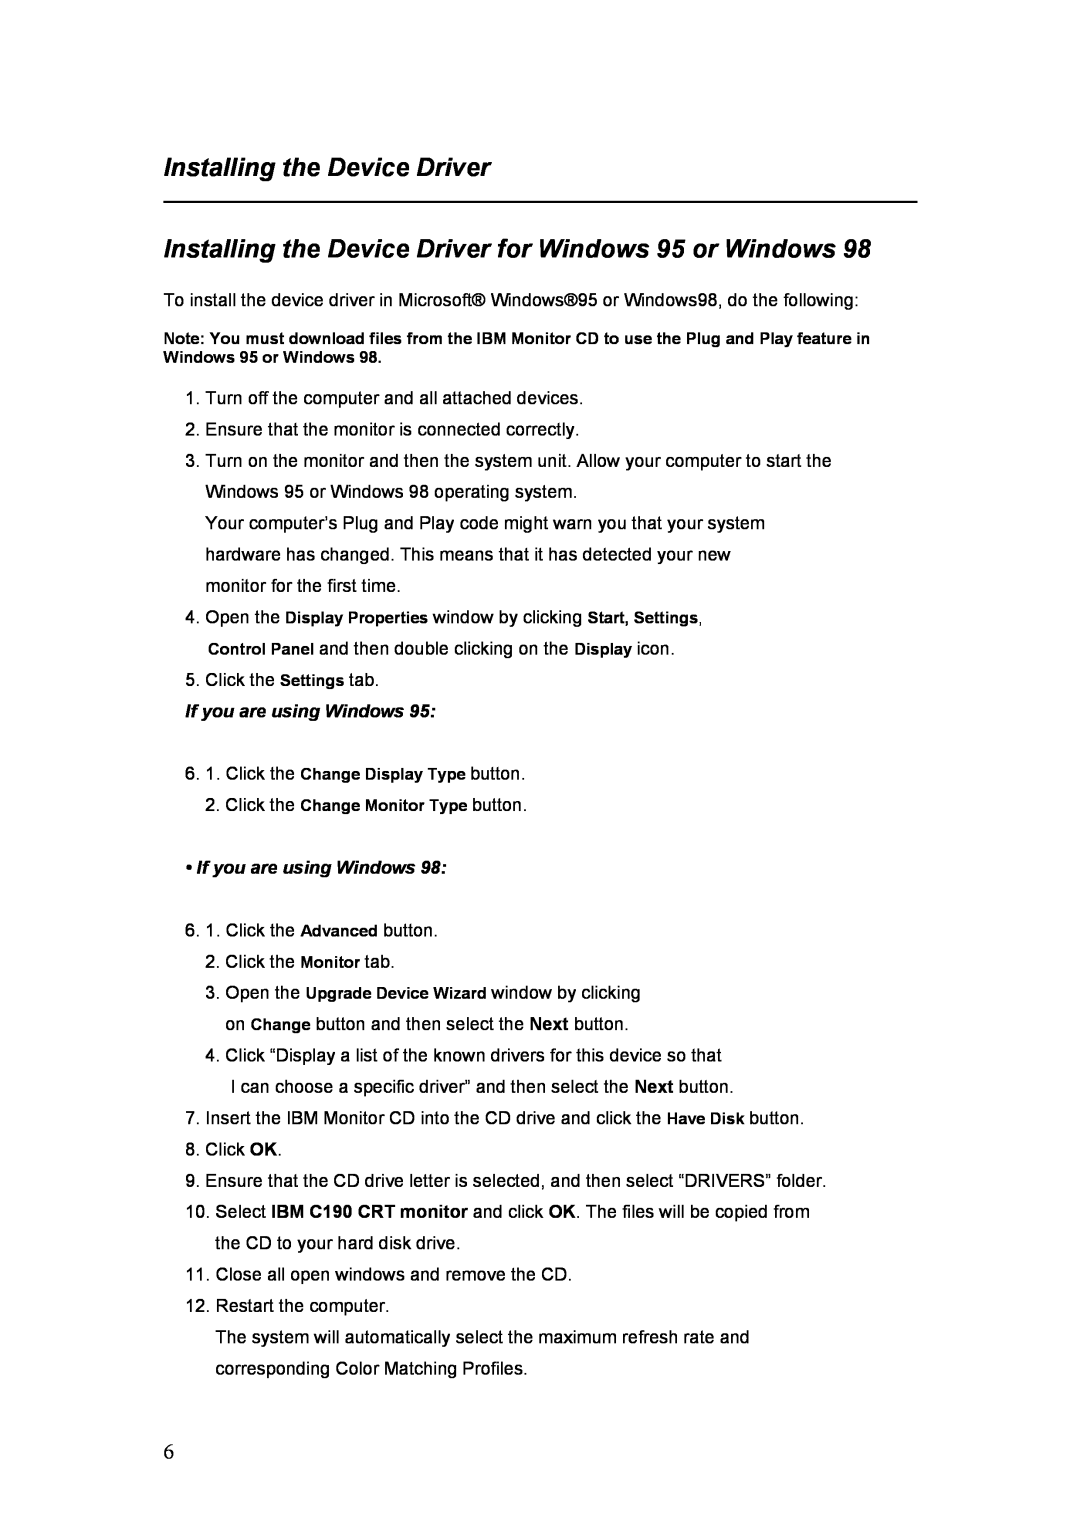 IBM C190 manual Installing the Device Driver for Windows 95 or Windows, If you are using Windows 